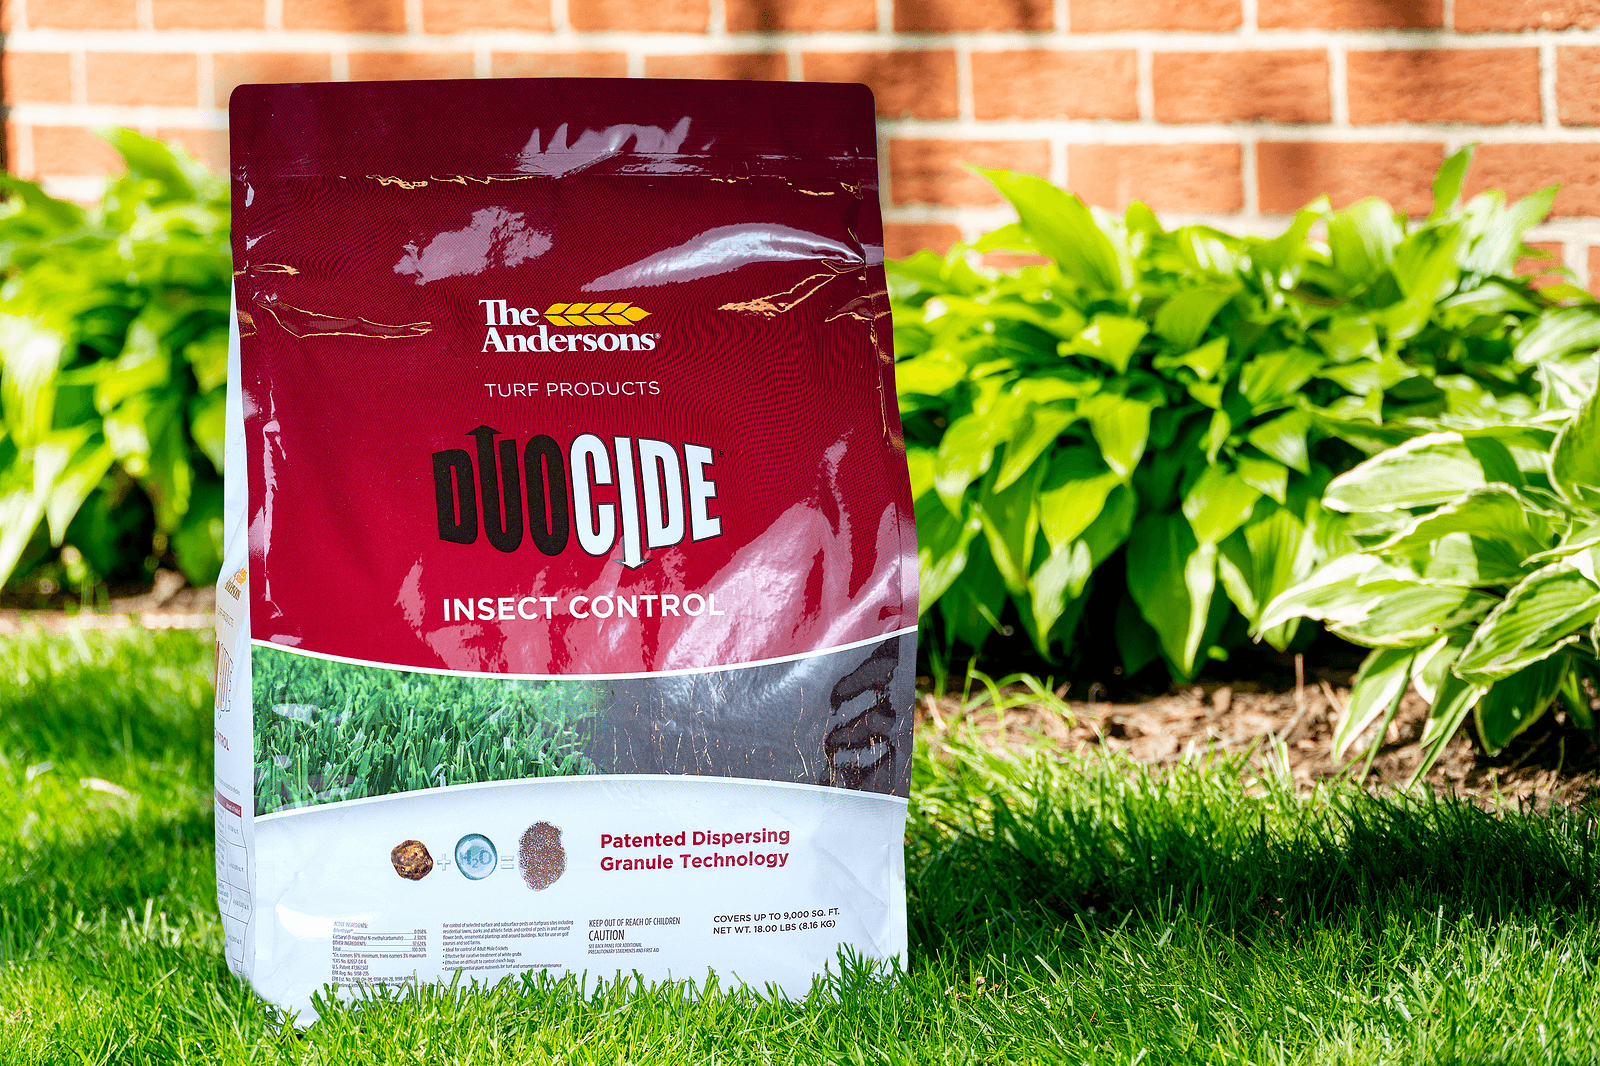 Duocide 18lb bag in grass 2